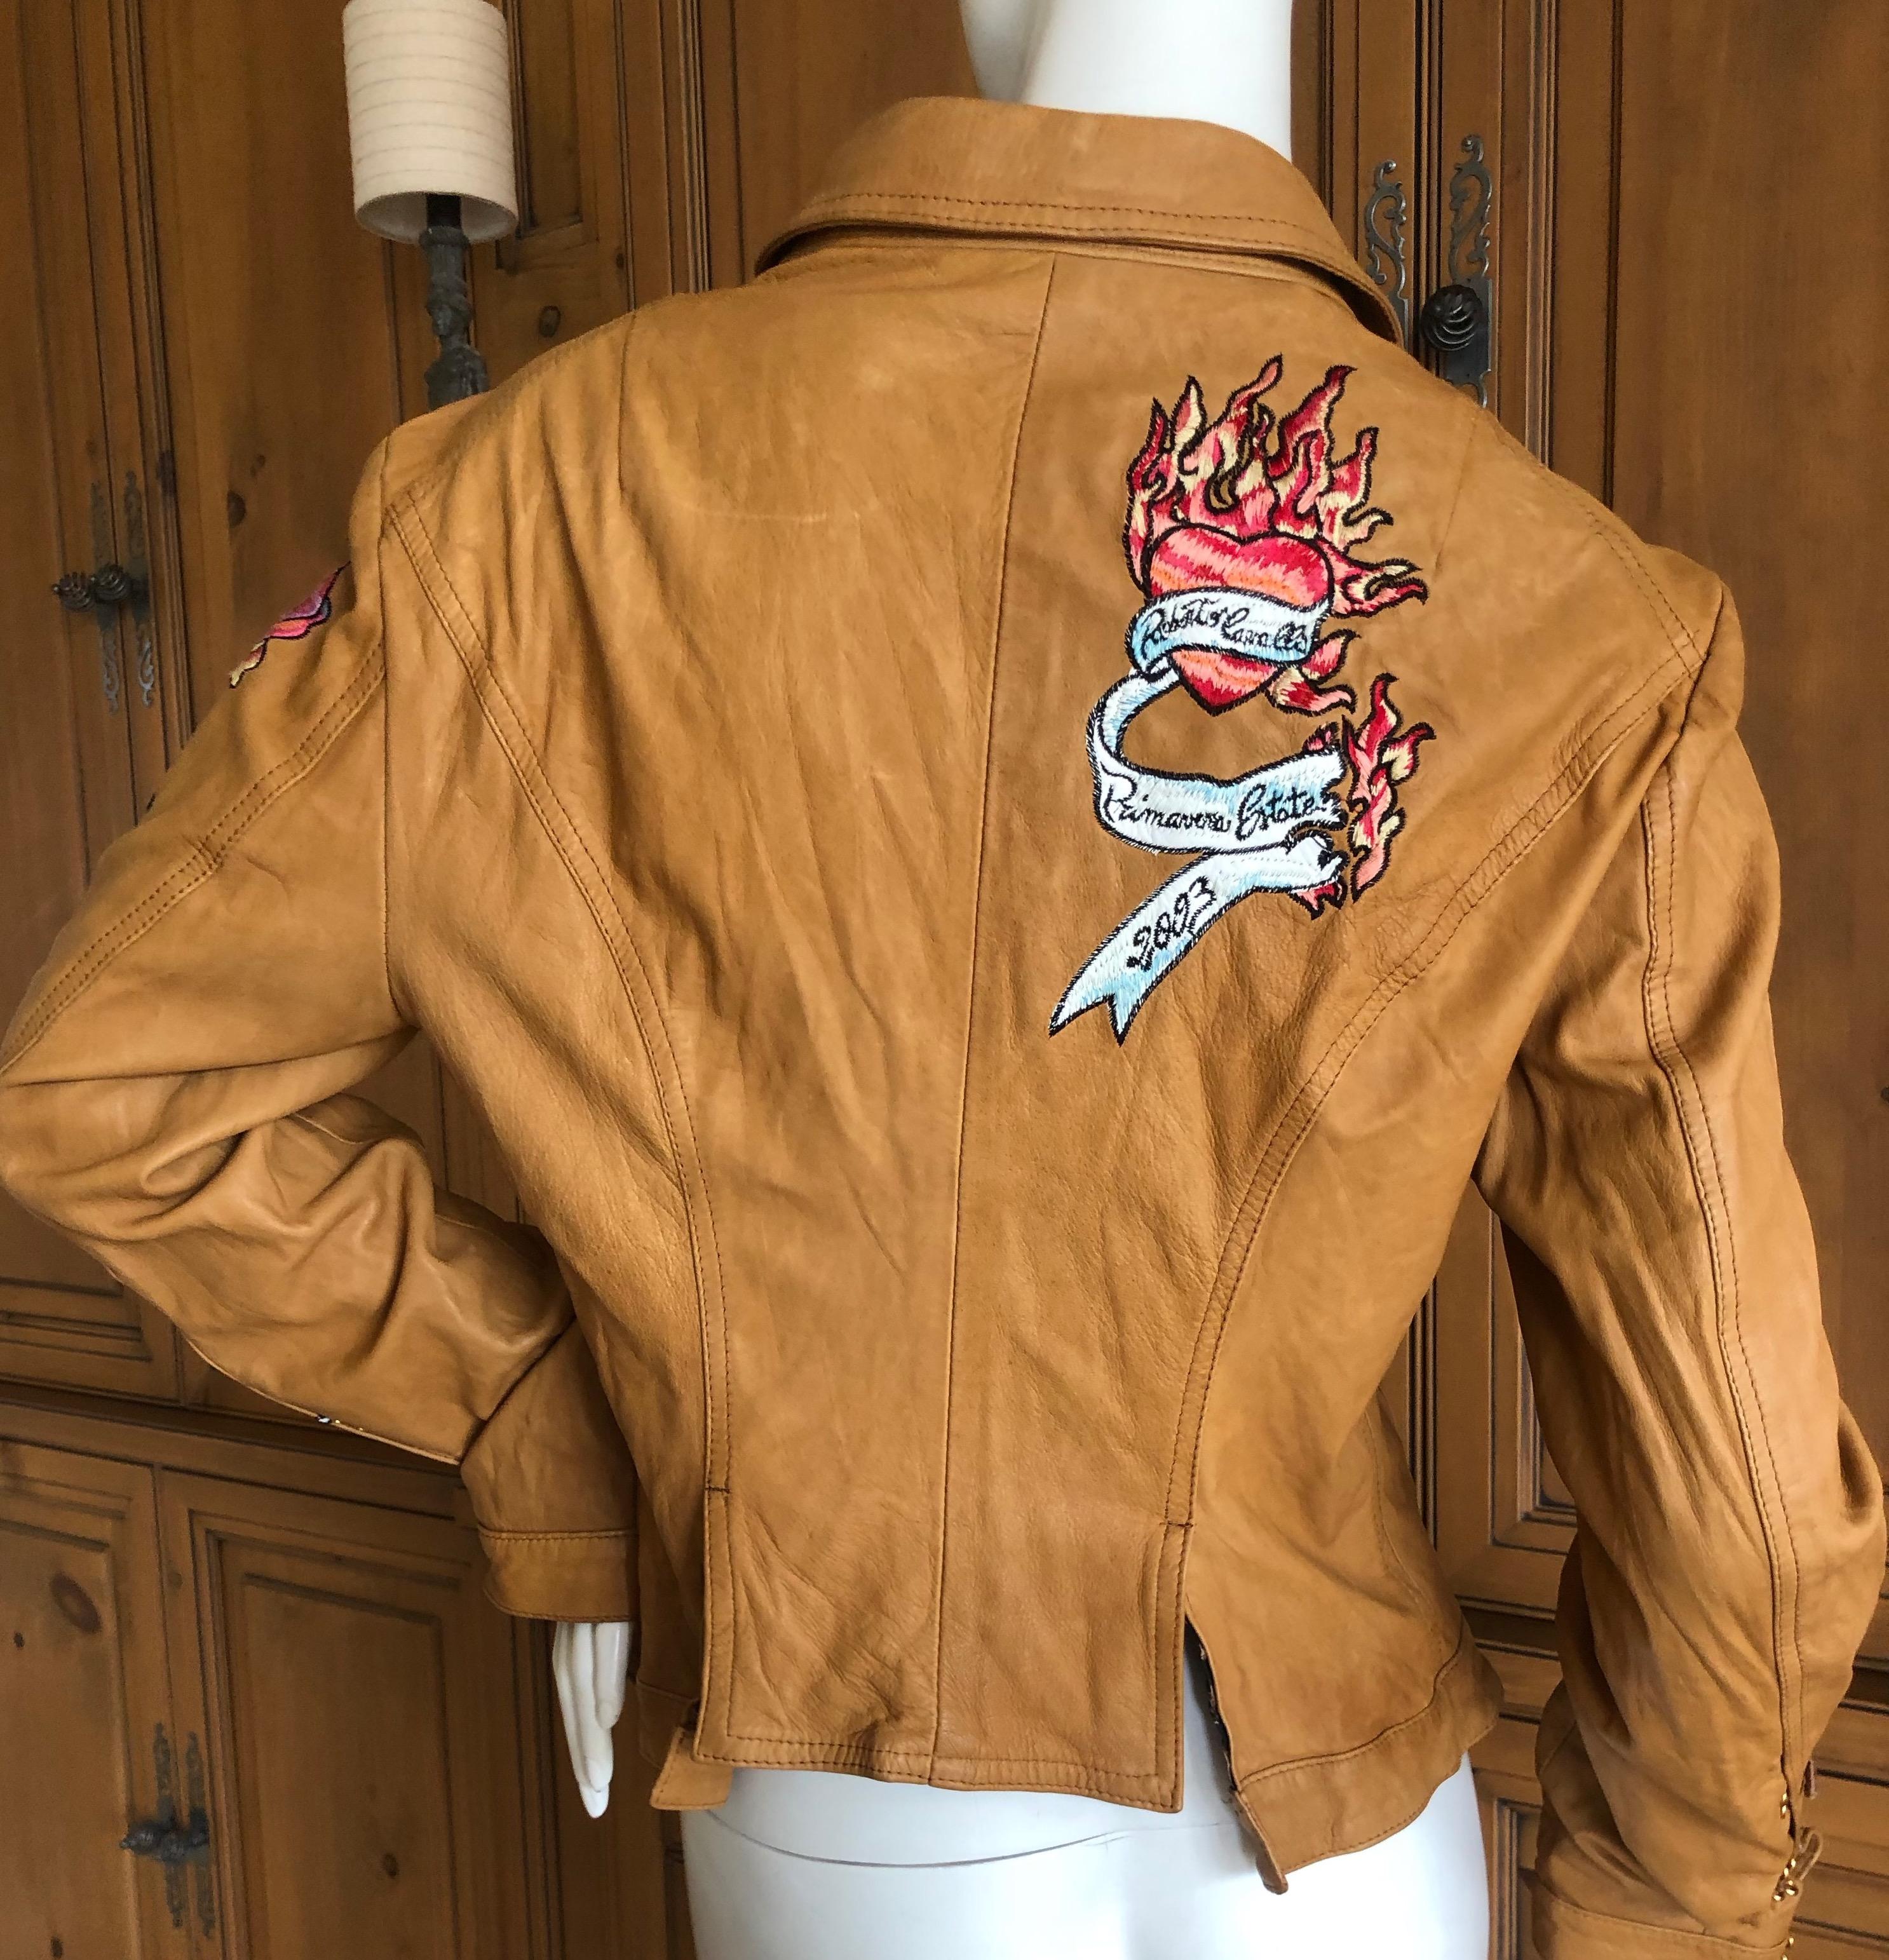 Roberto Cavalli Collectable Leather Jacket with Tattoo Embroidery 2003 For Sale 1